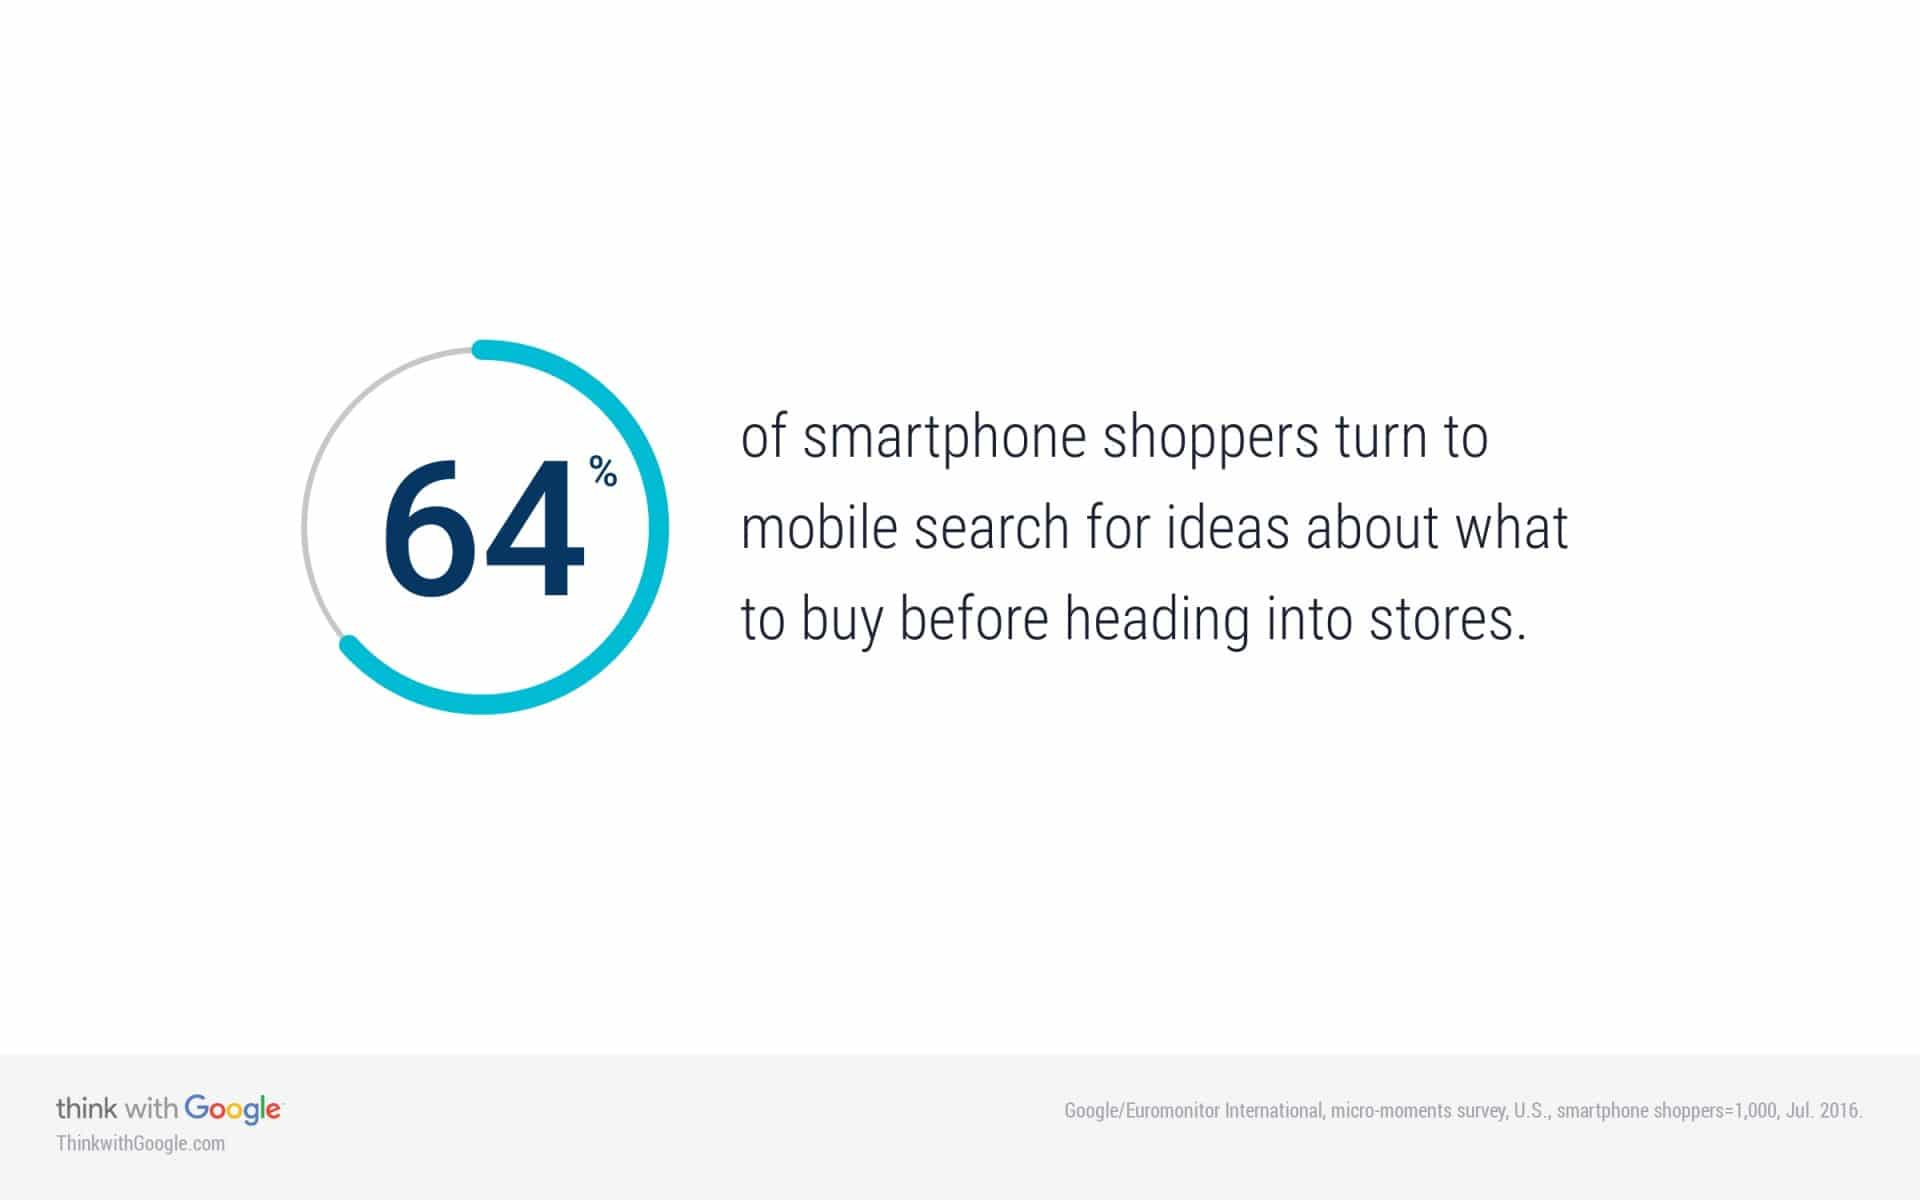 64% of smartphone users search before buying in stores.